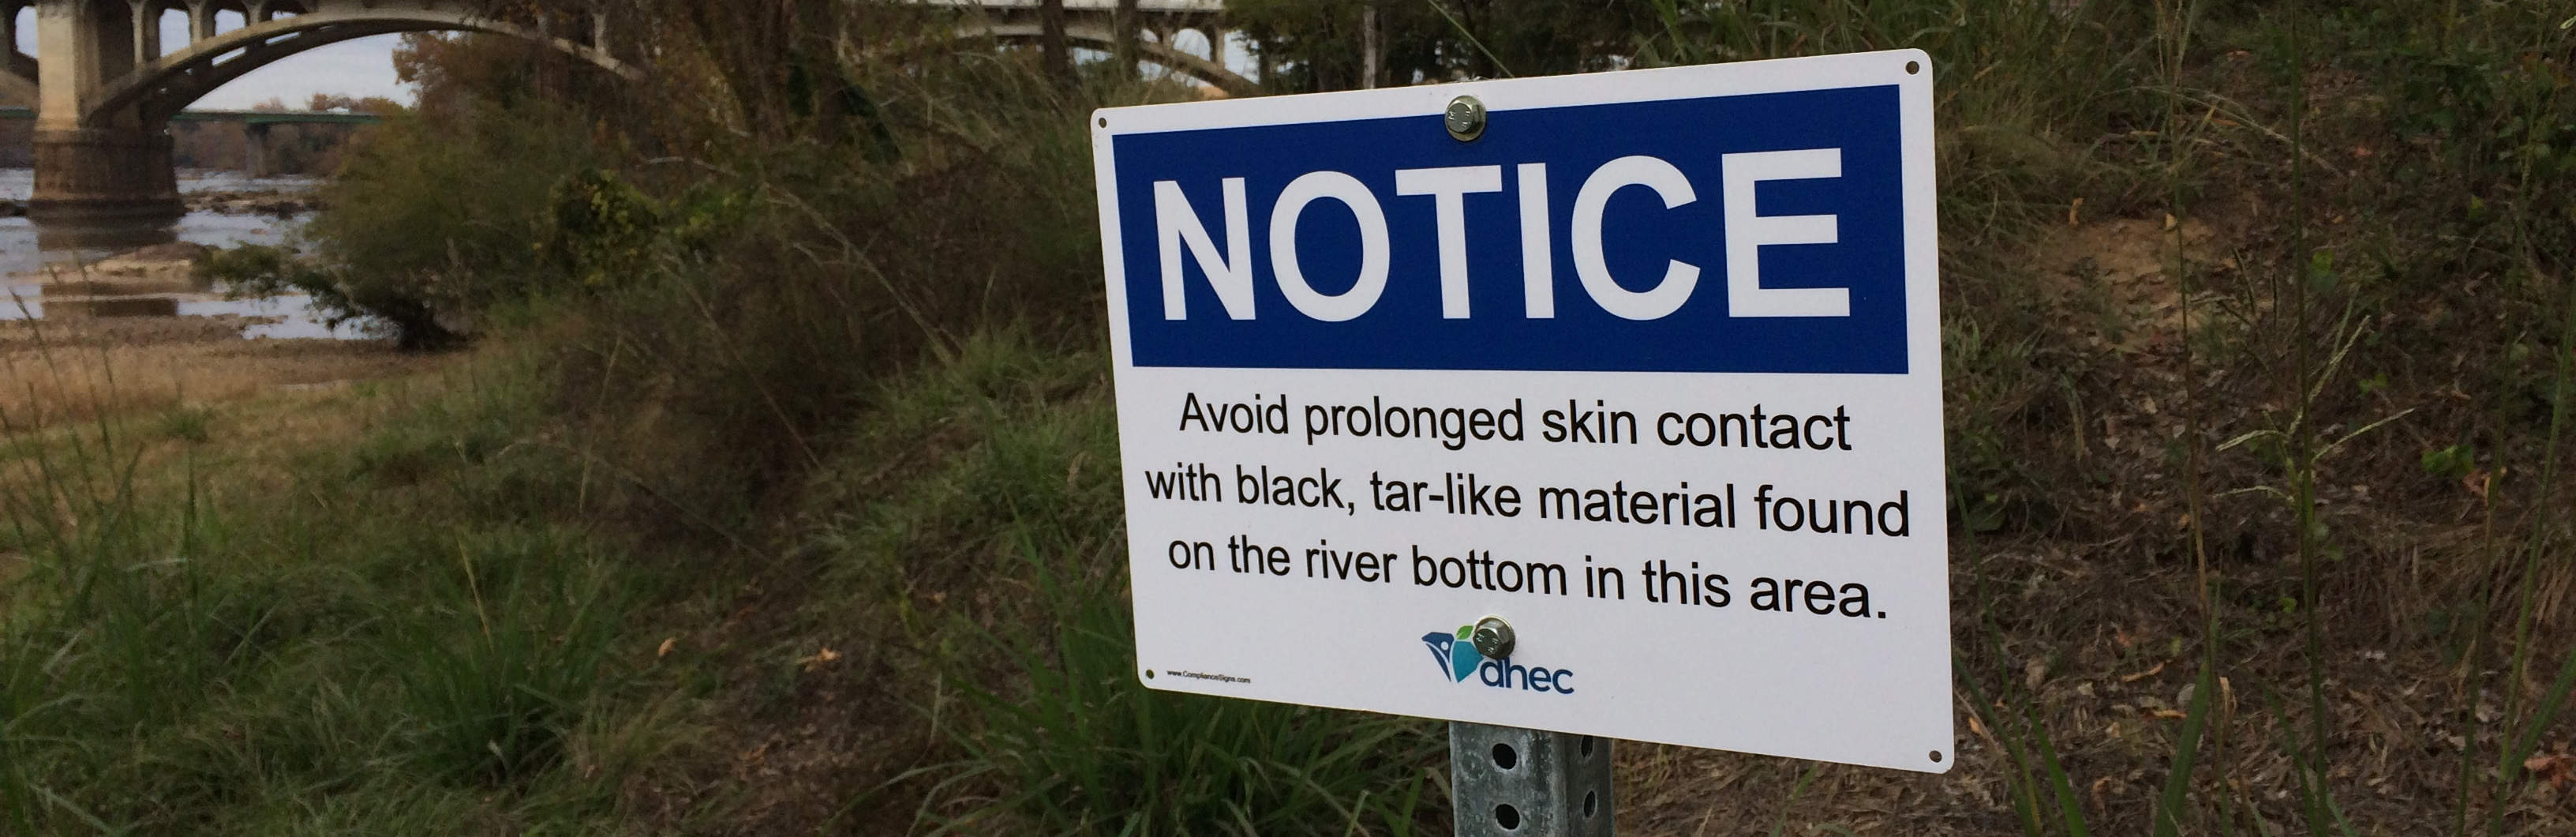 Notice sign on banks of the Congaree